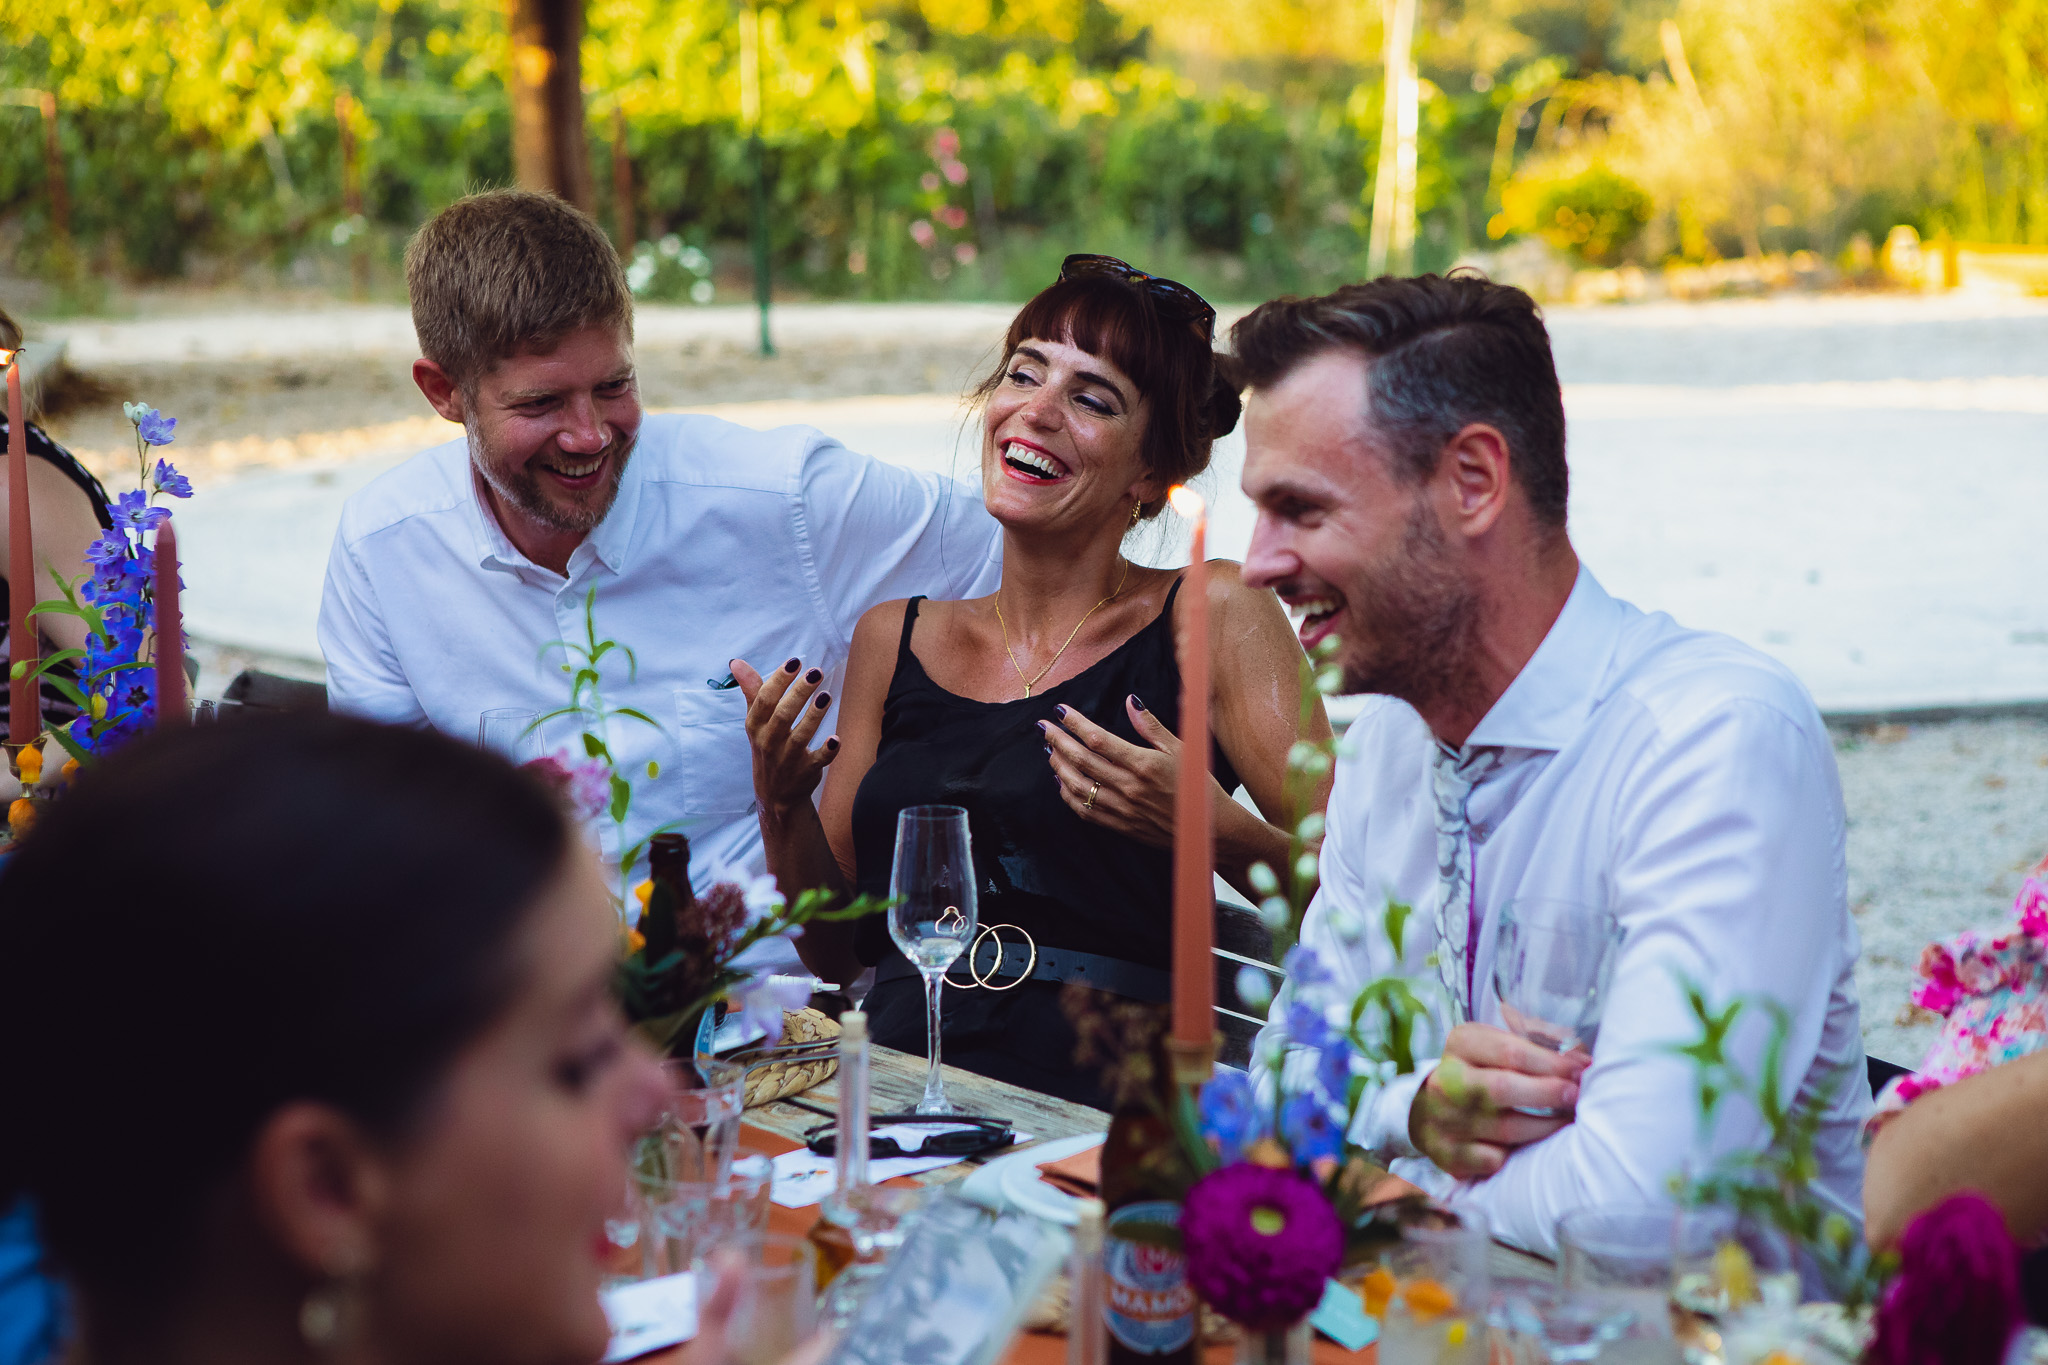 Guests laugh at the wedding dinner table at a beautiful destination wedding in Corfu